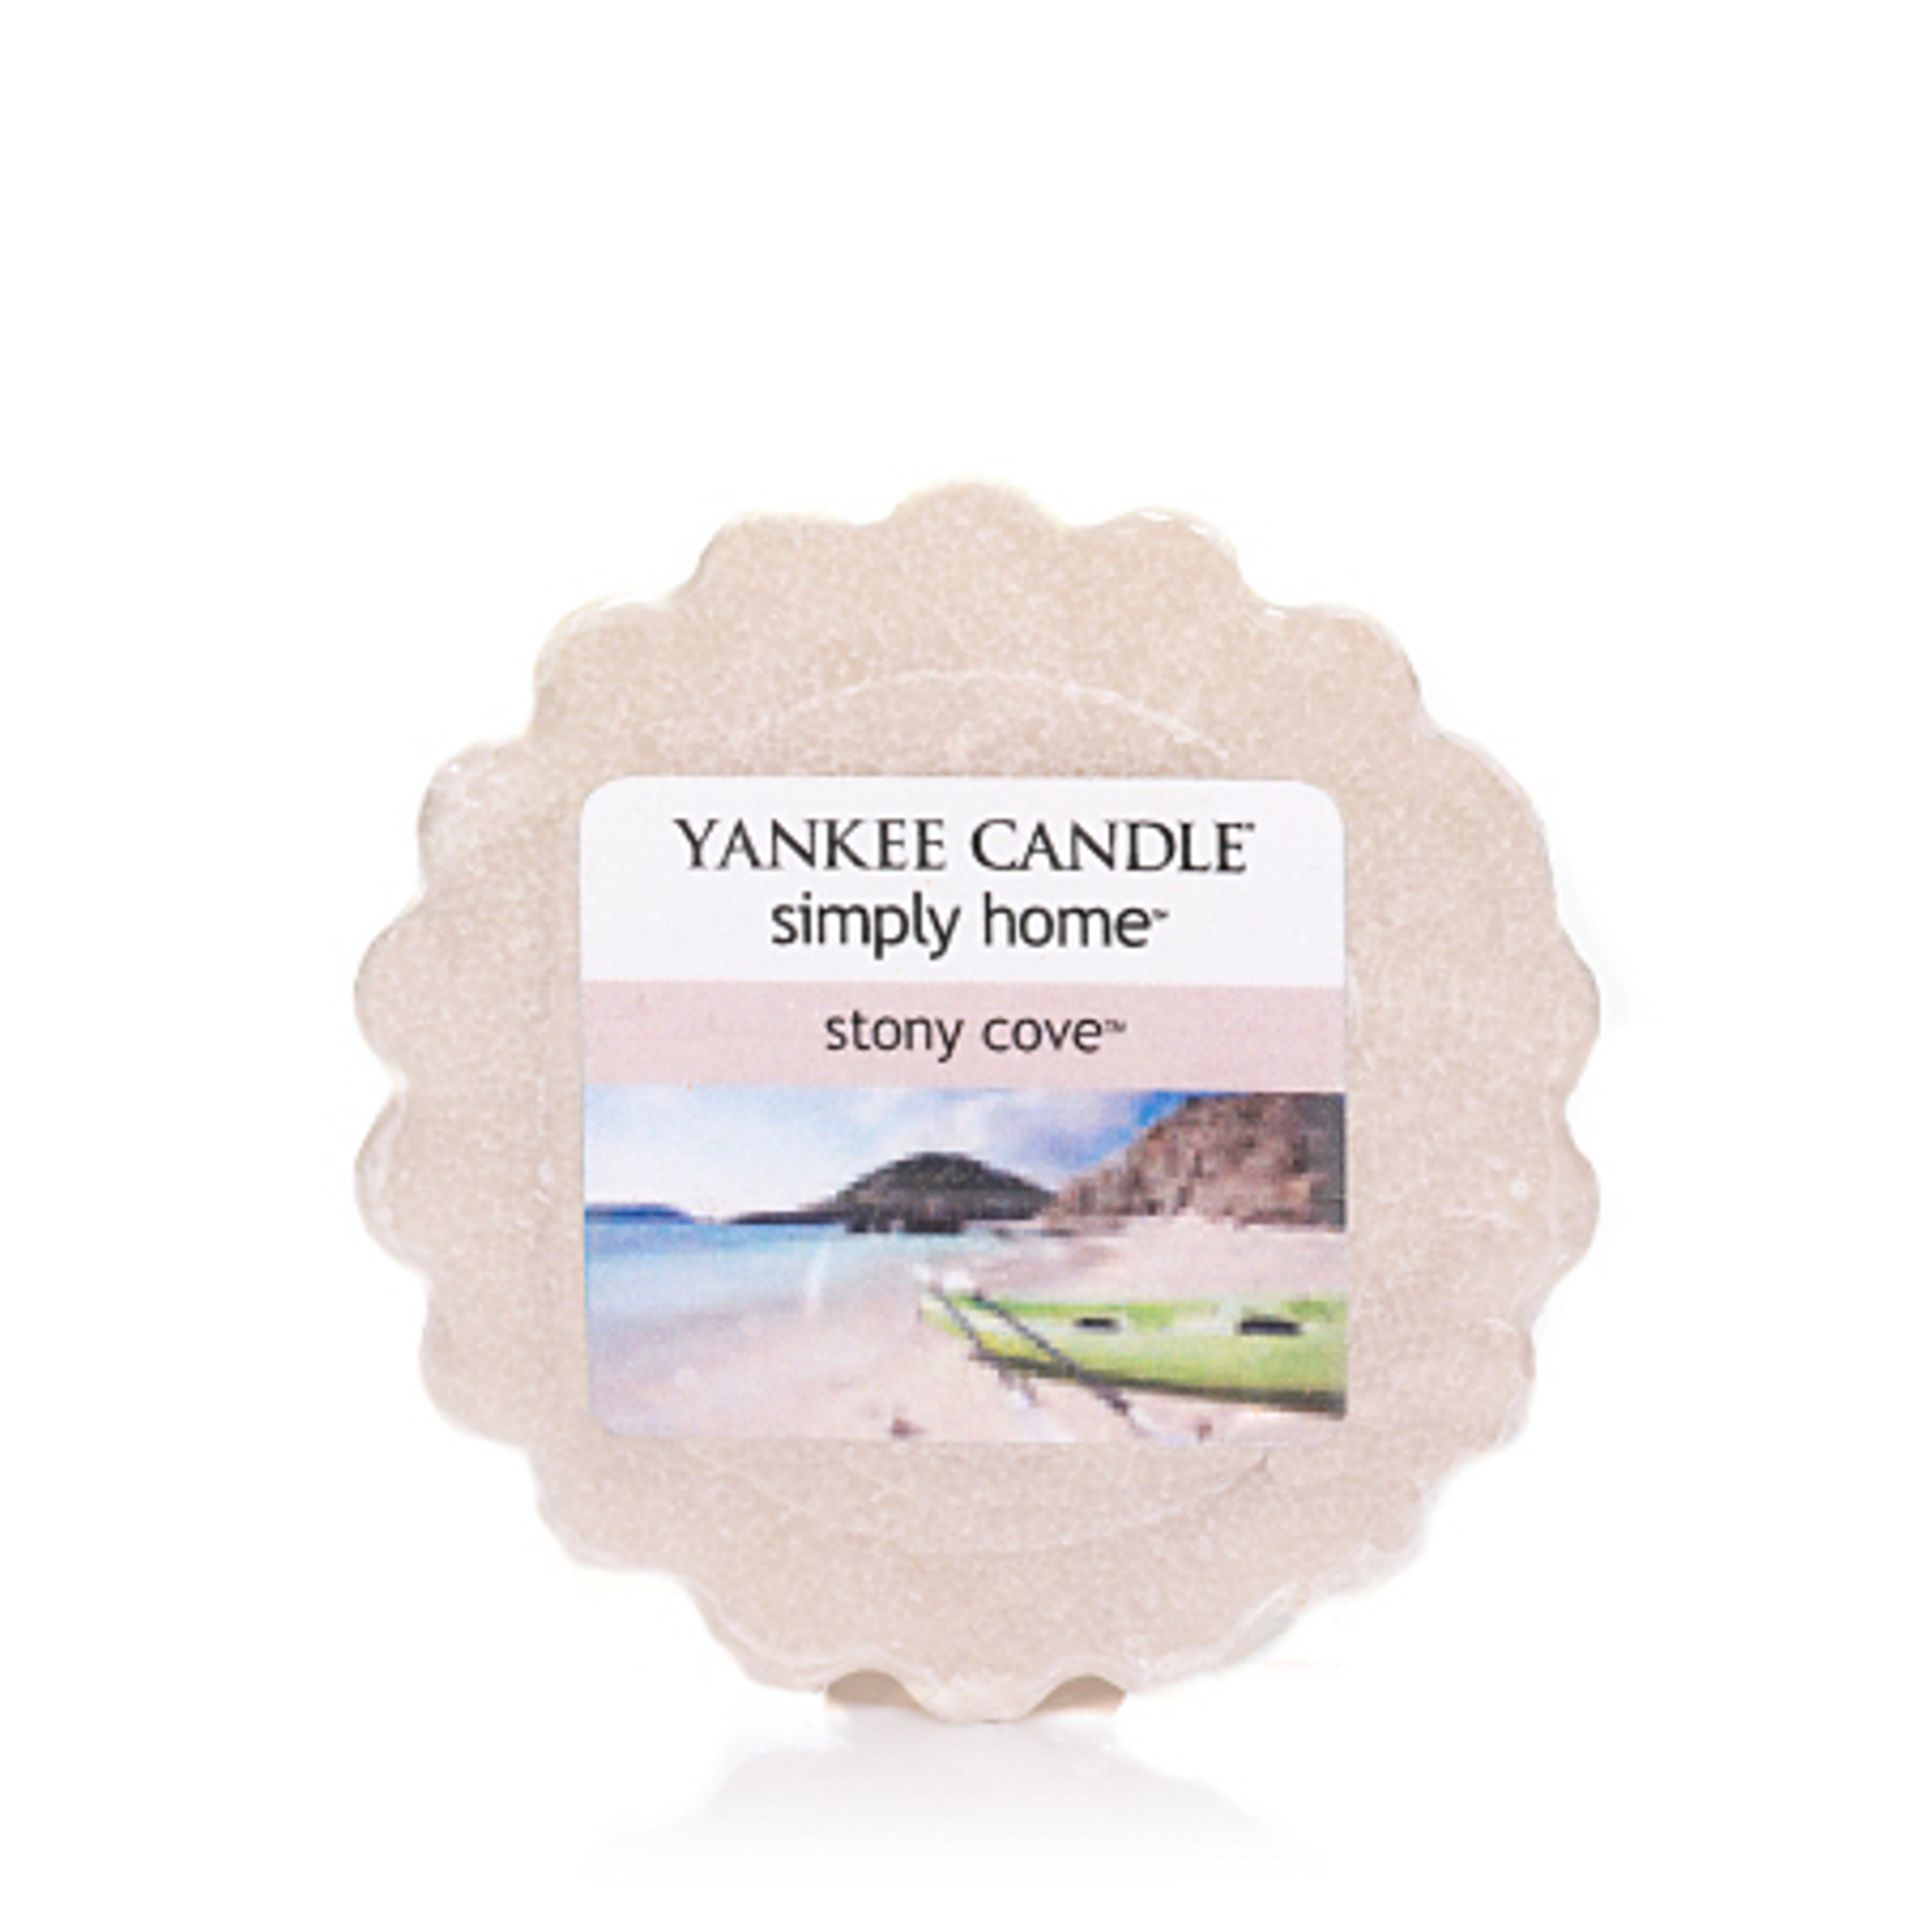 V *TRADE QTY* Brand New 24 x Yankee Candle Tarts Stony Cove RRP: £35.76 (Yankee Candles) X 10 YOUR